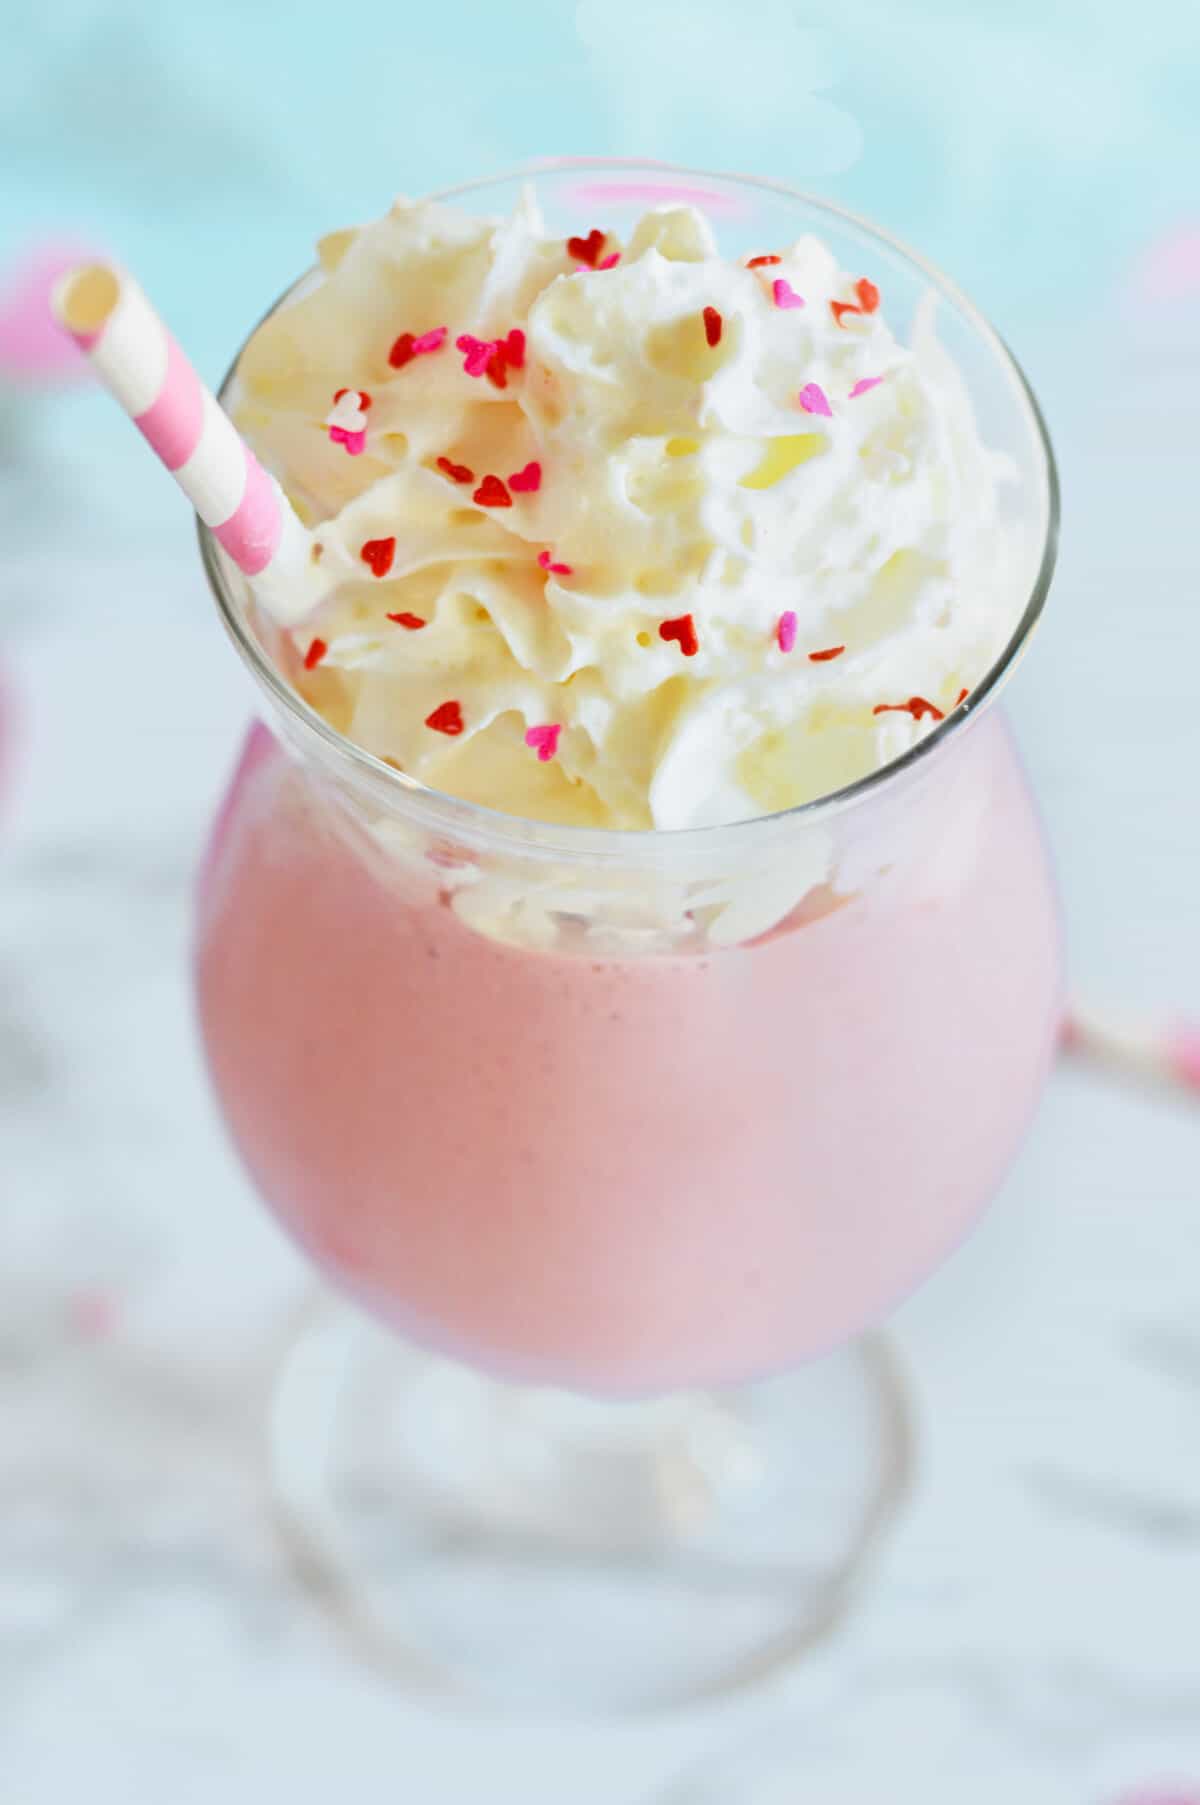 Strawberry mudslide drink topped with whipped cream and heart sprinkles.